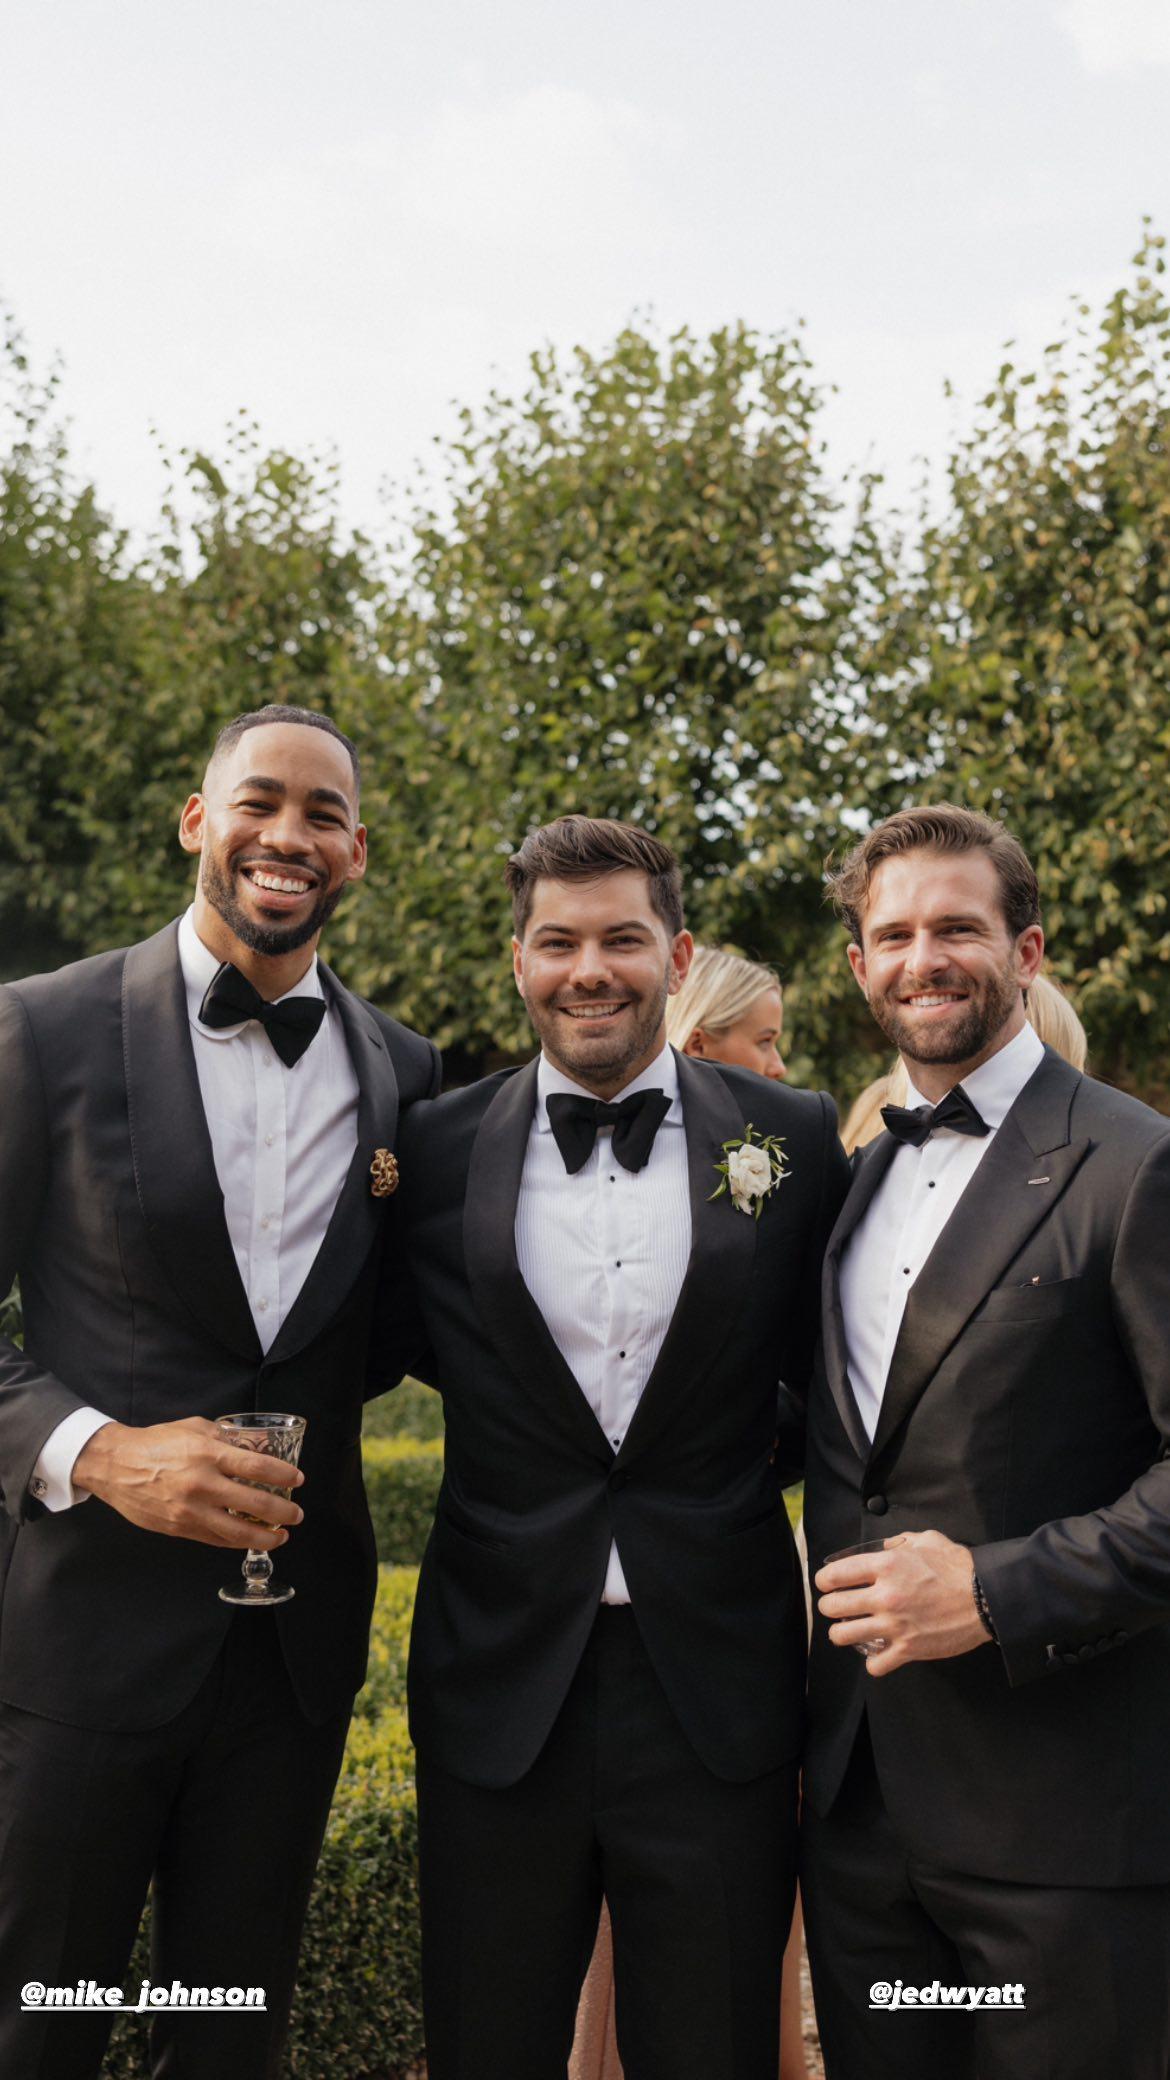 See Which 'Bachelor' Alum Attended Hannah Godwin and Dylan Barbour's Wedding